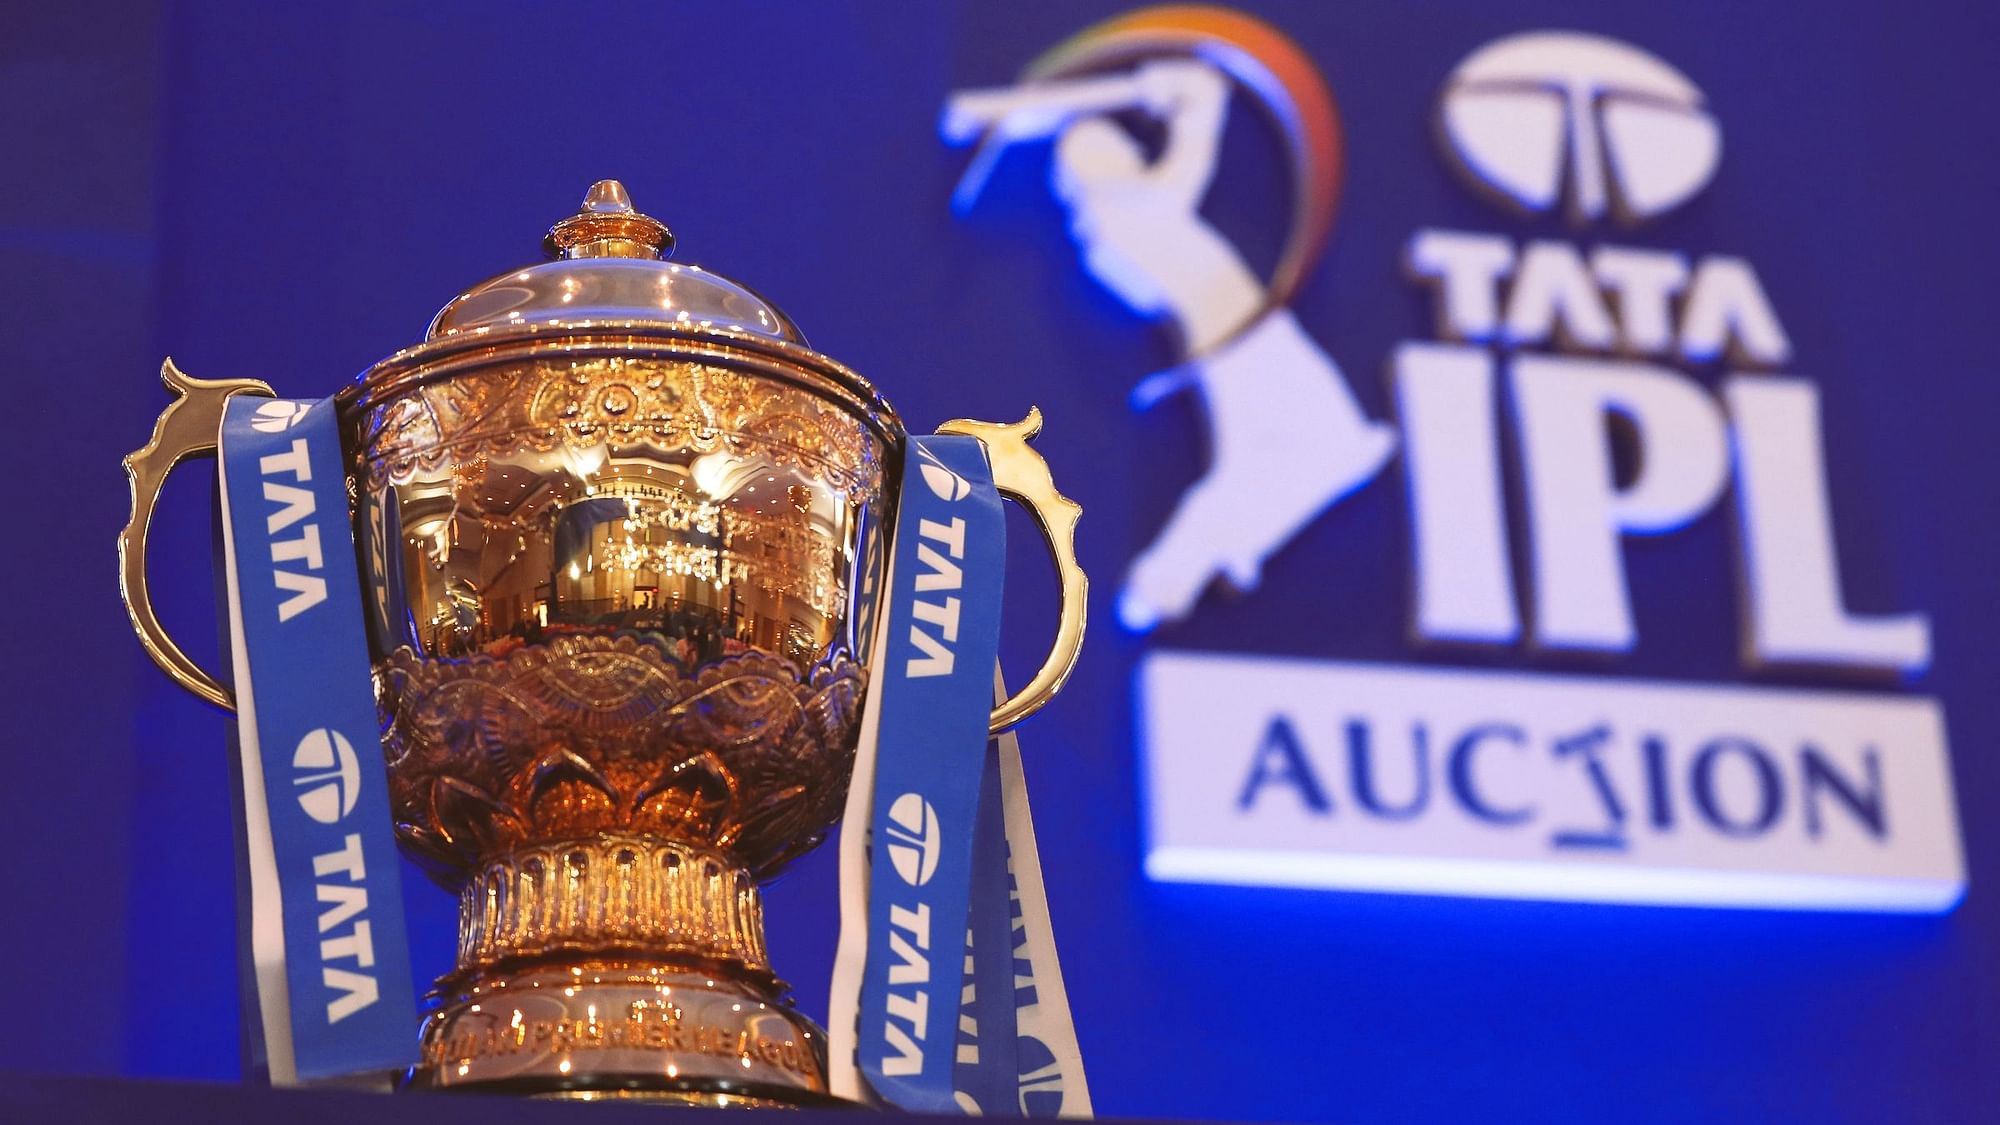 <div class="paragraphs"><p>IPL's digital rights have been bought by Viacom 18 for Rs 23,758 crore for 5 seasons.</p></div>